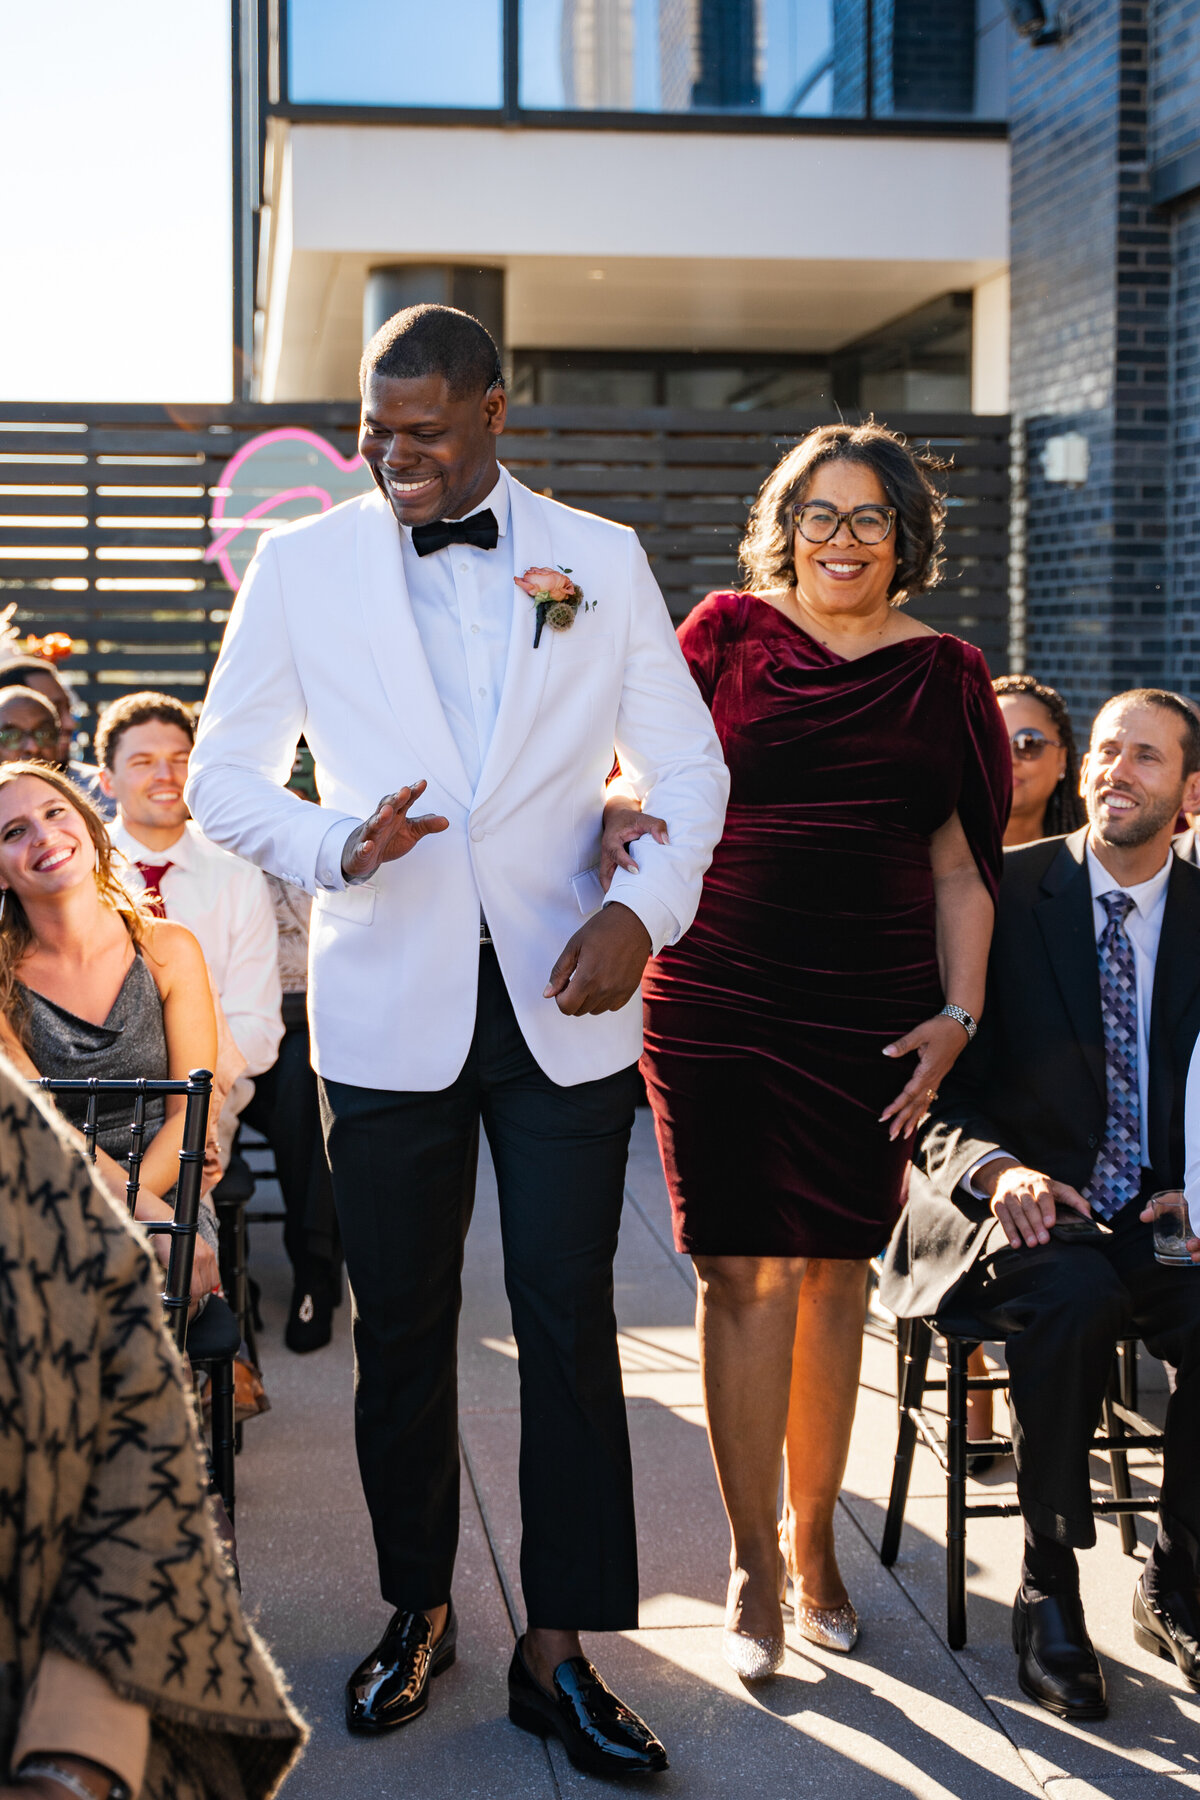 Groom waves and walks with his mother down the aisle at his wedding at The Terrace in Columbus, Ohio.